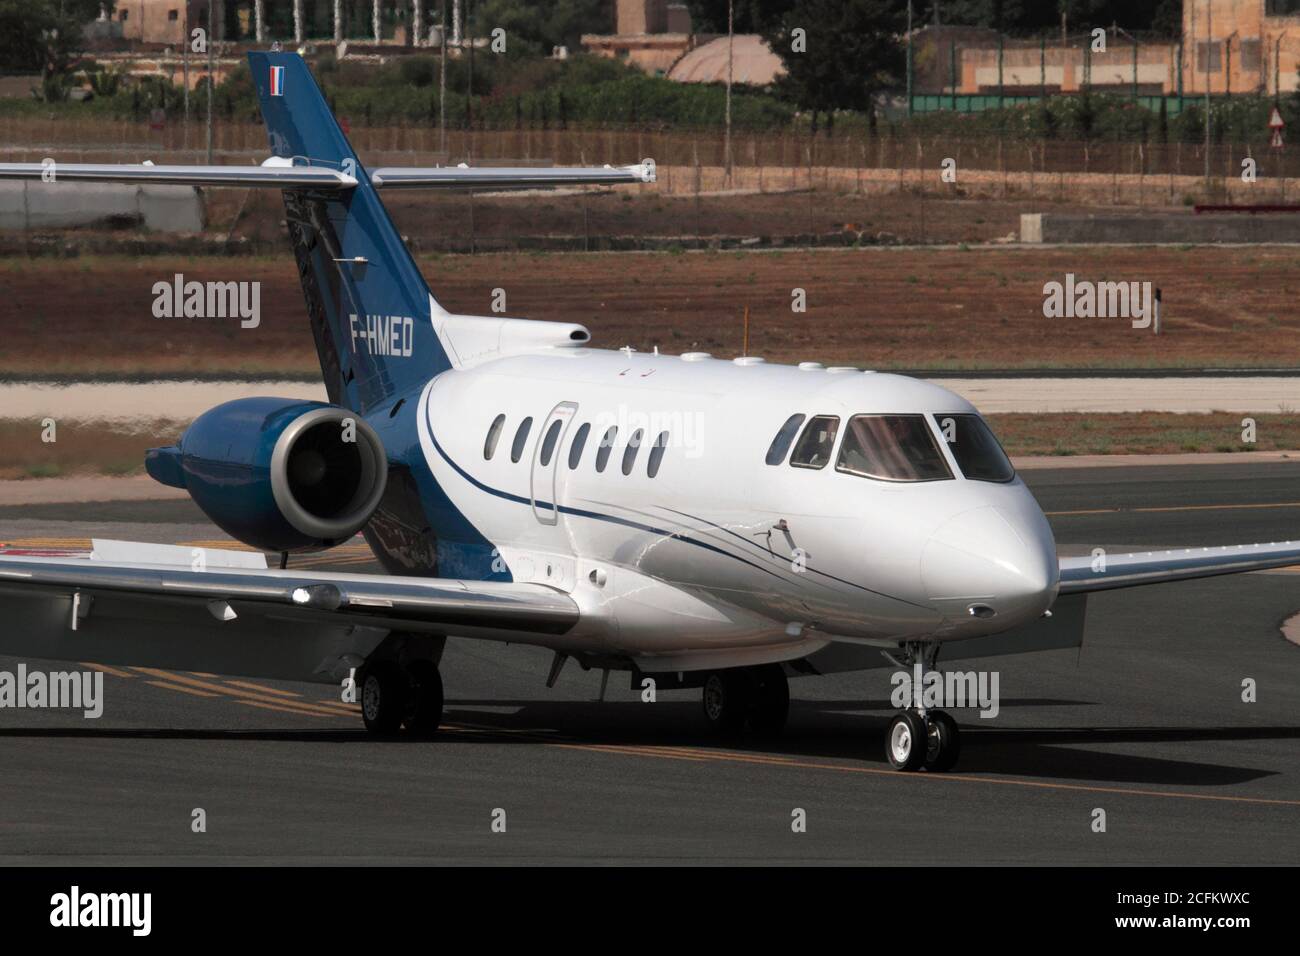 British Aerospace 125-1000 (Raytheon Hawker 1000) business jet on arrival in Malta. Closeup view from the front. VIP air travel. Stock Photo